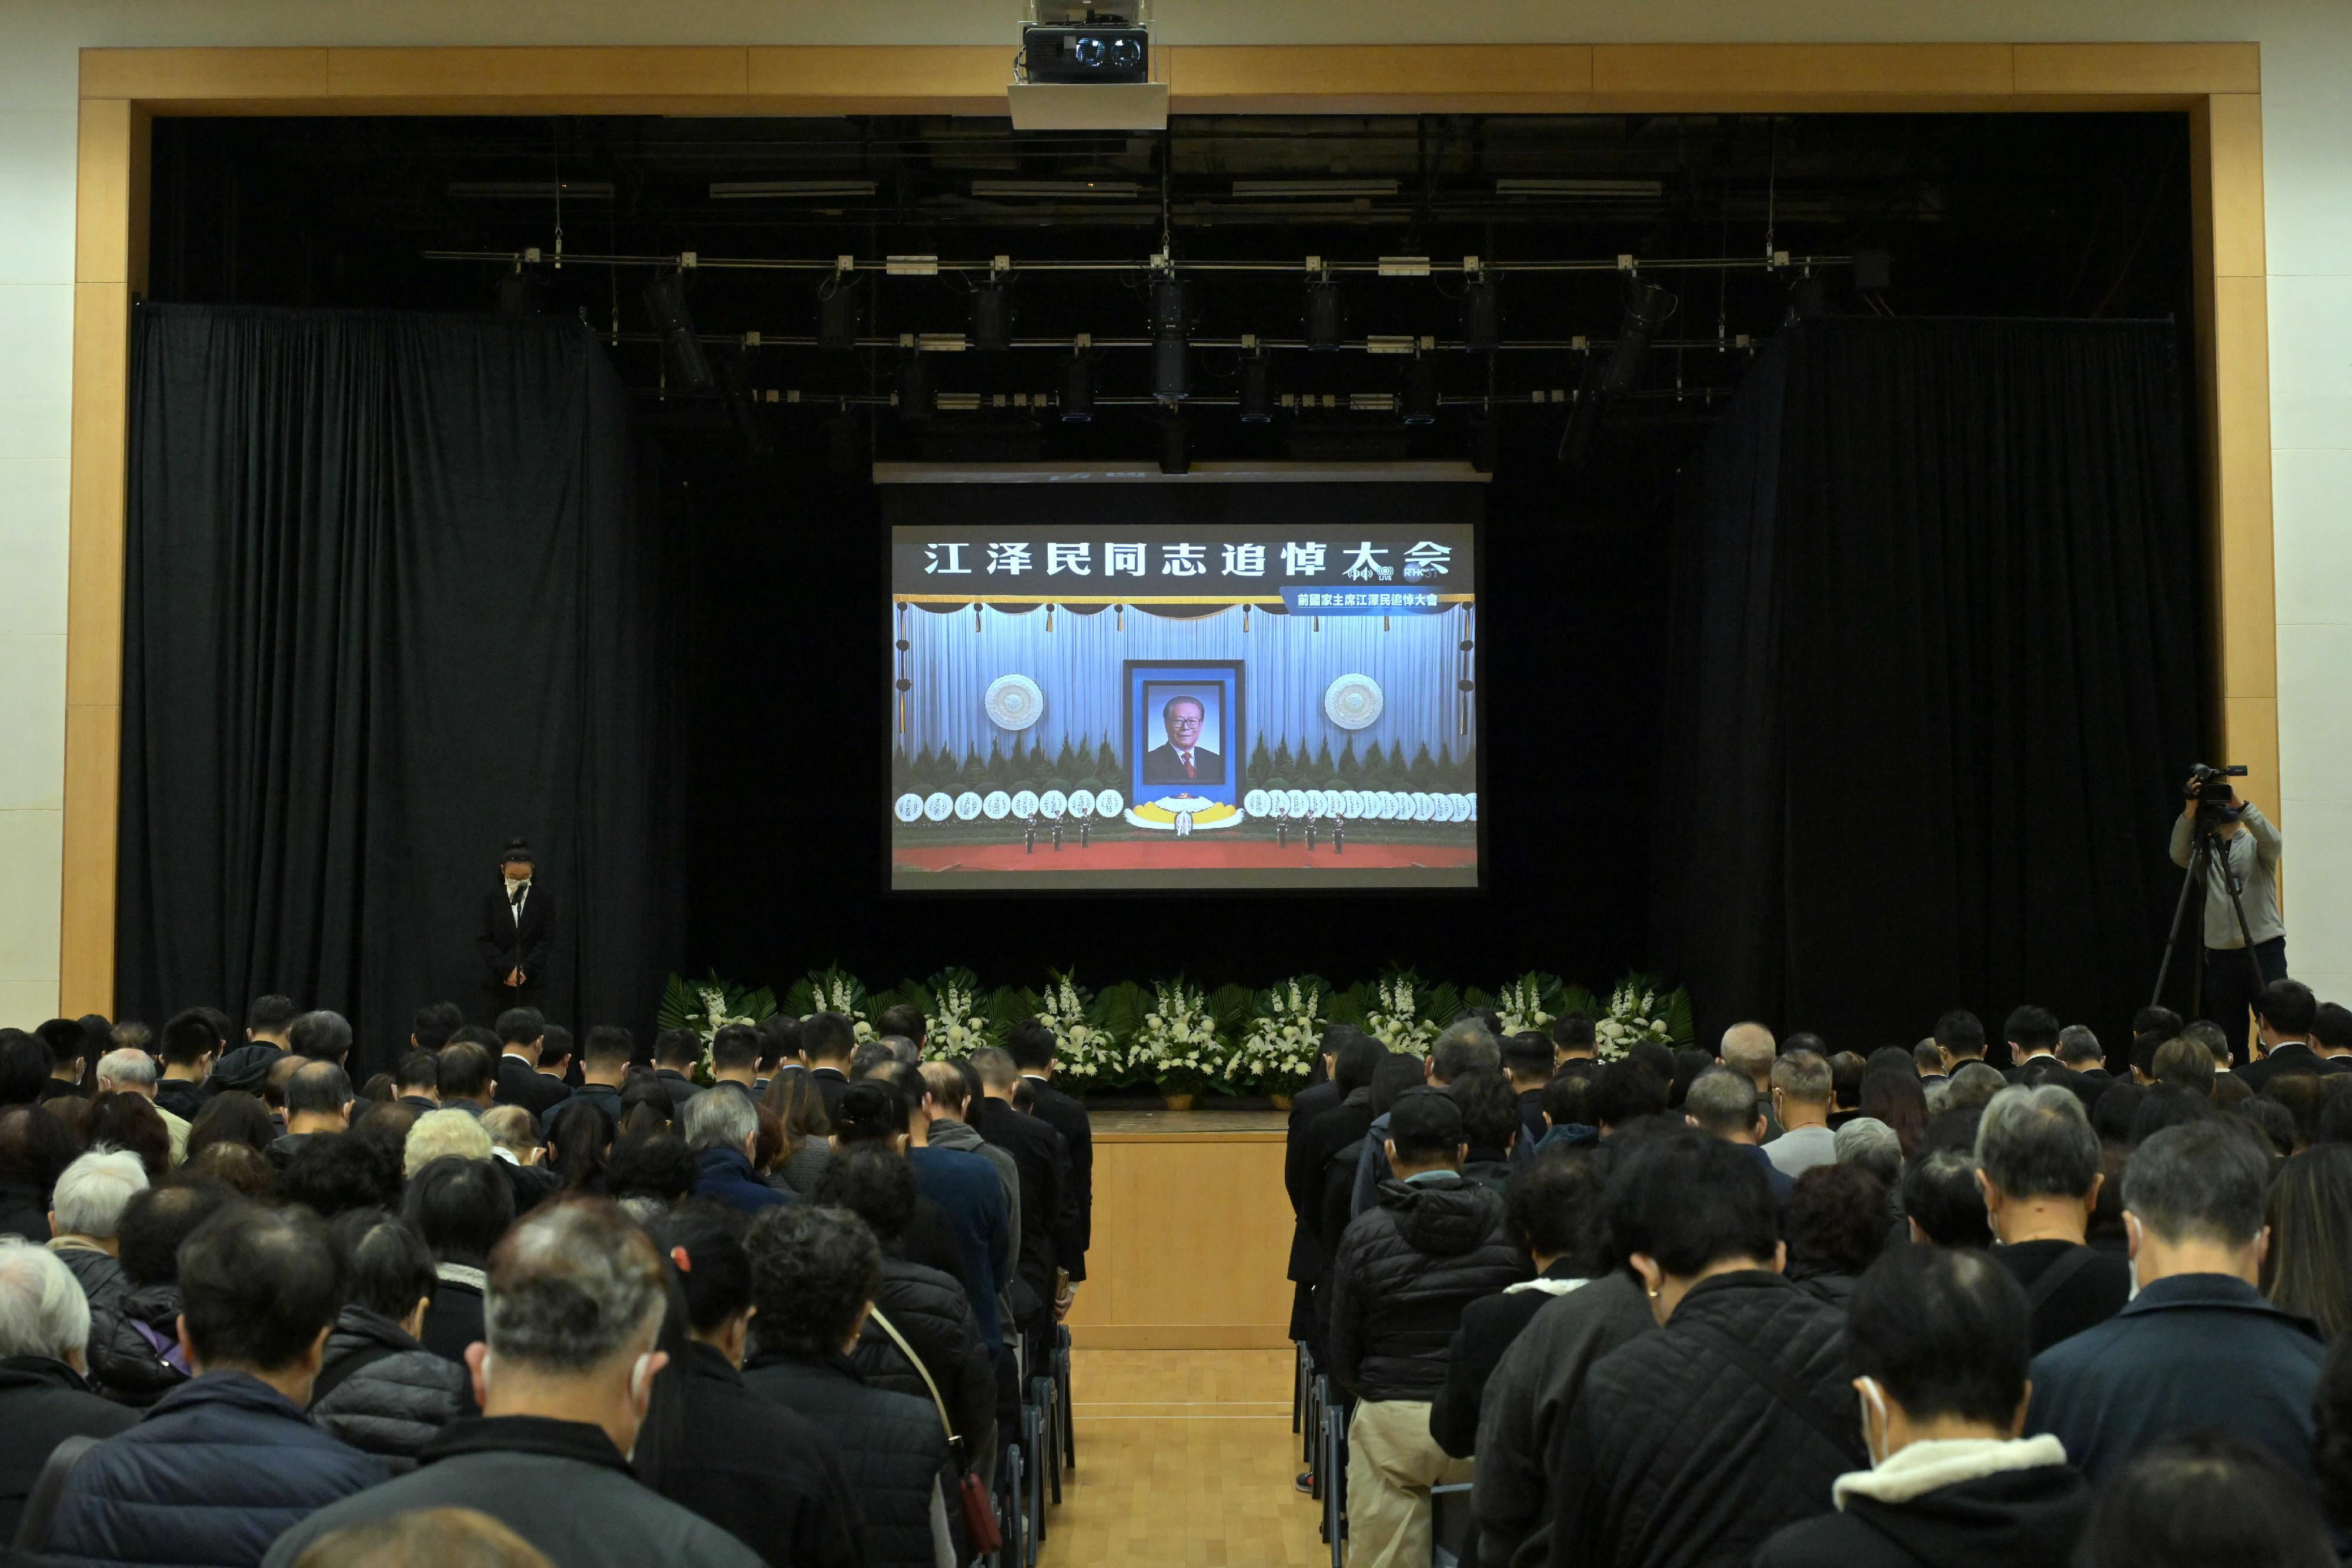 The memorial service for Former President of the People's Republic of China, Mr Jiang Zemin, was held solemnly at the Great Hall of the People in Beijing at 10am today (December 6). The 18 District Offices made arrangements to enable members of the public to watch the live broadcast of the memorial service and observe the mourning in silence at designated locations across the territory. Photo shows the live broadcast of the service at the Sau Mau Ping Community Hall.